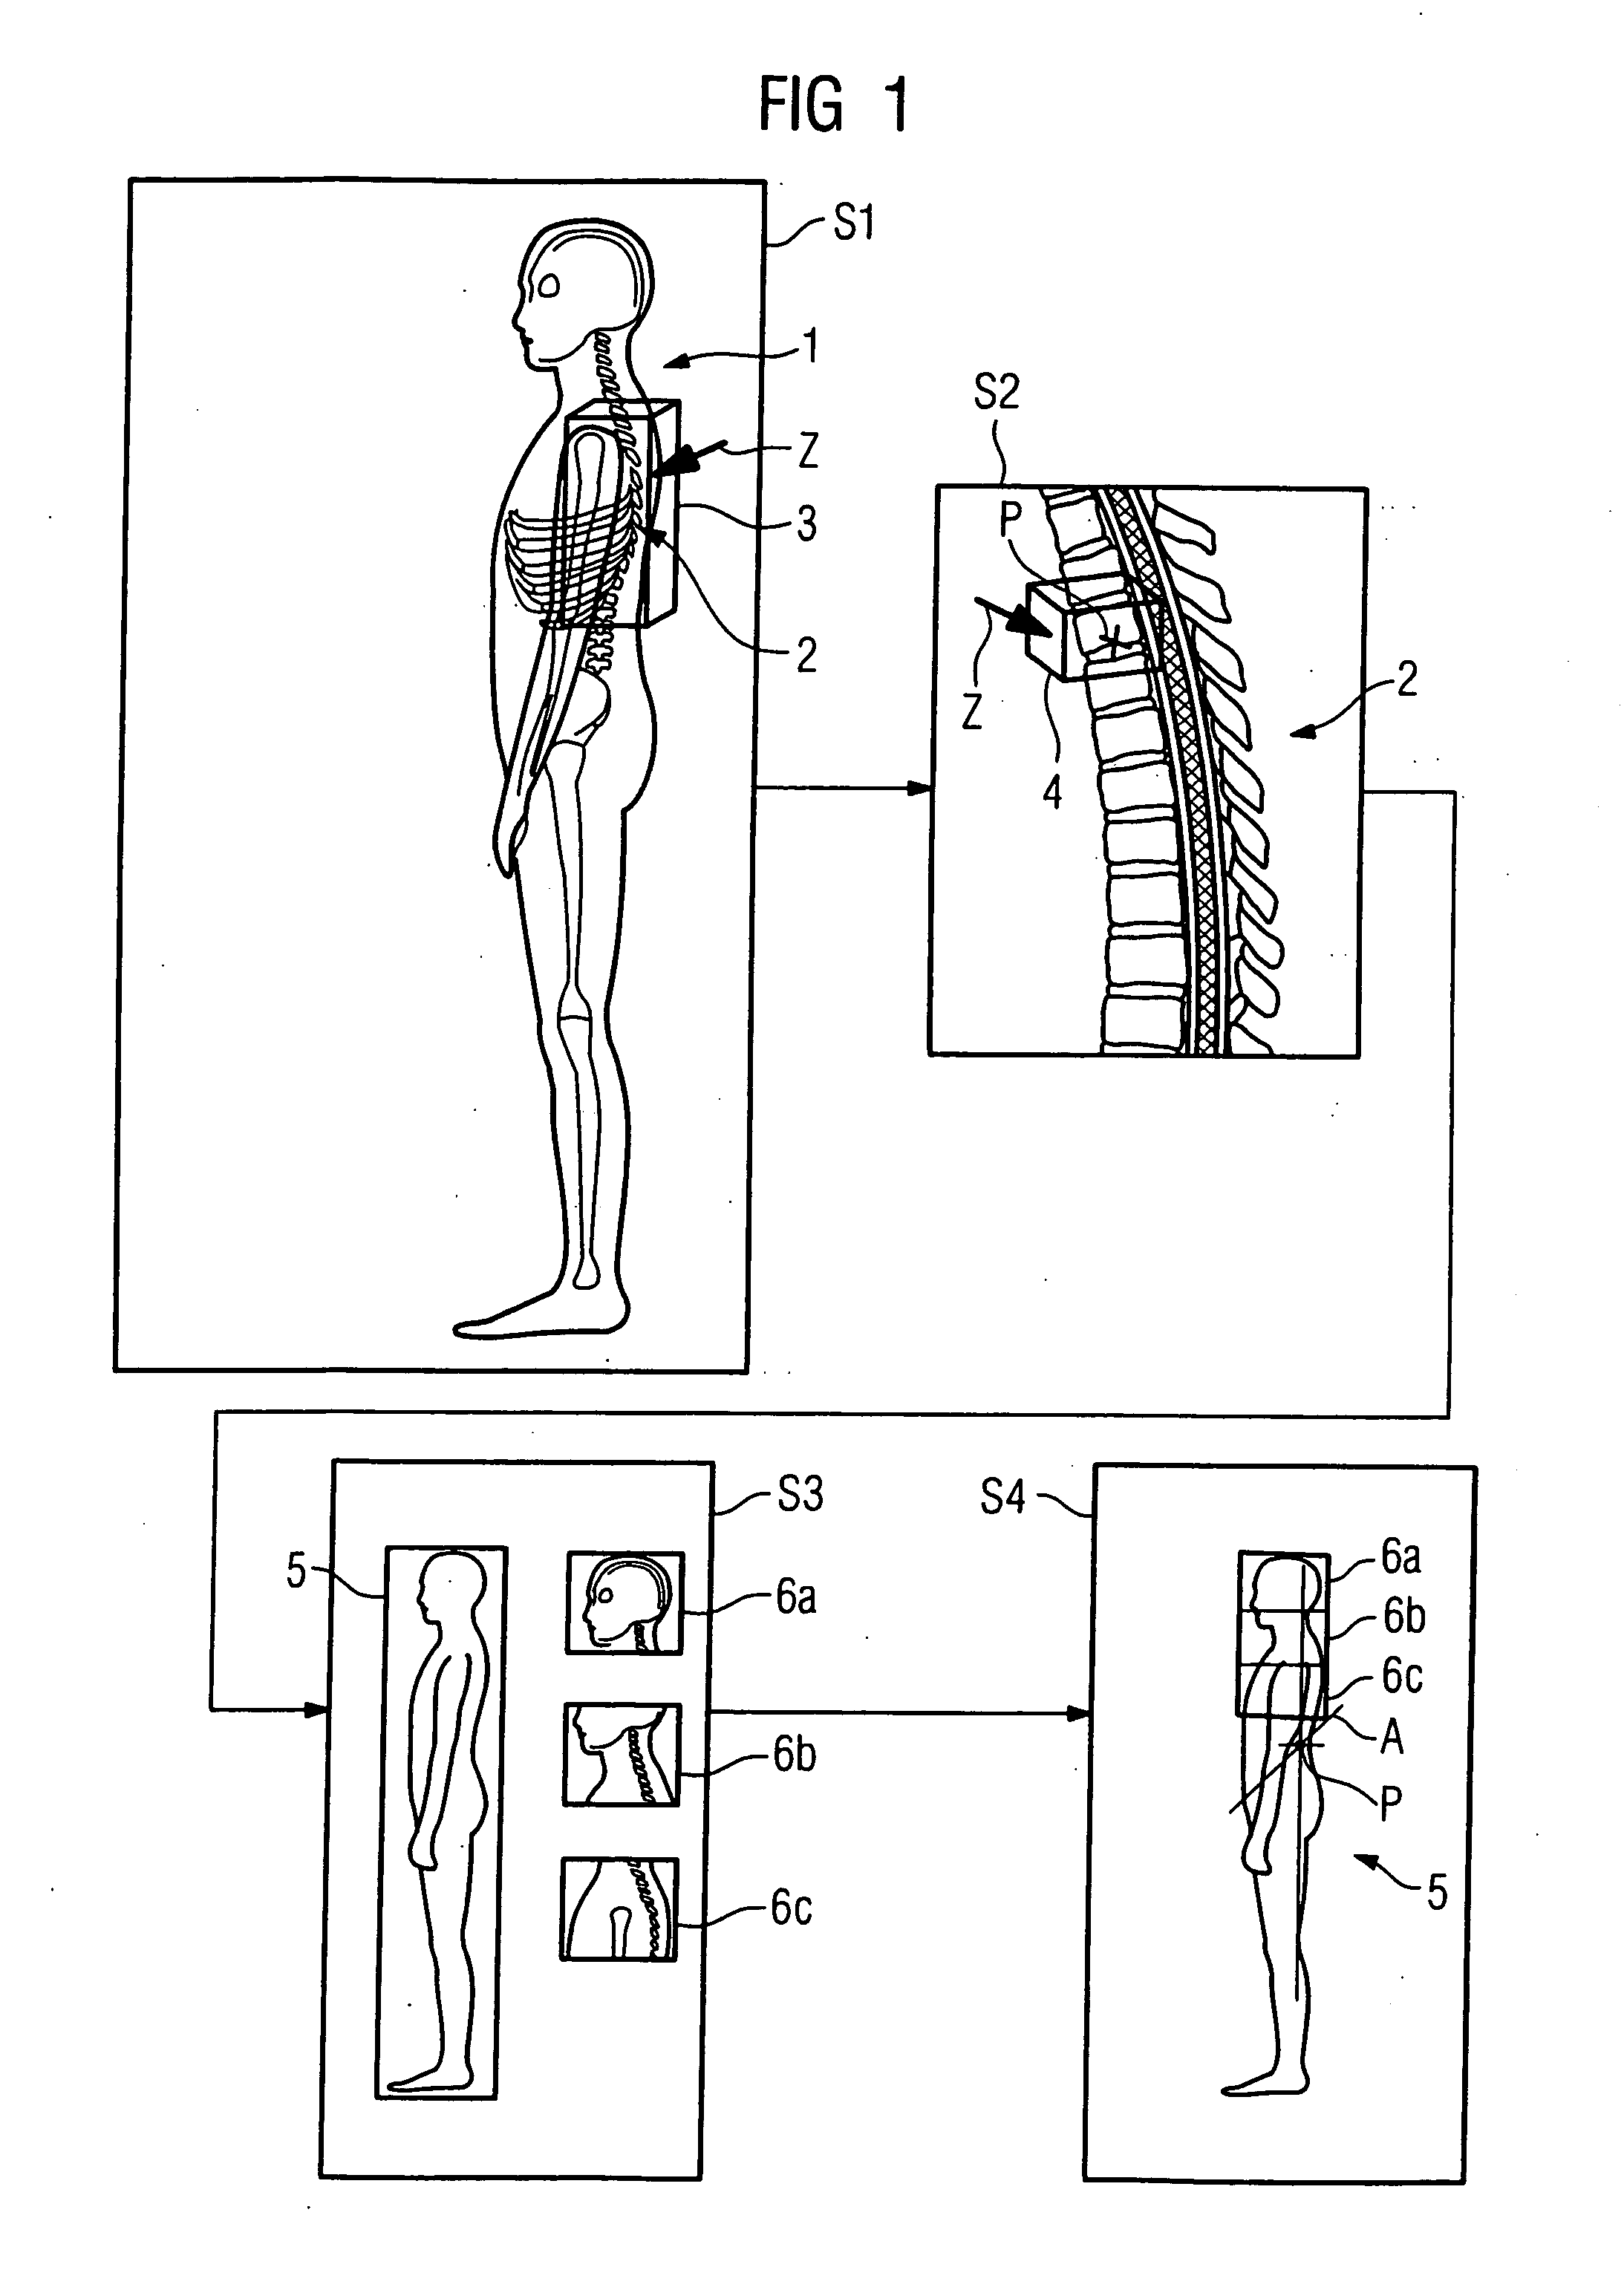 Method and apparatus for acquisition and evaluation of image data of an examination subject